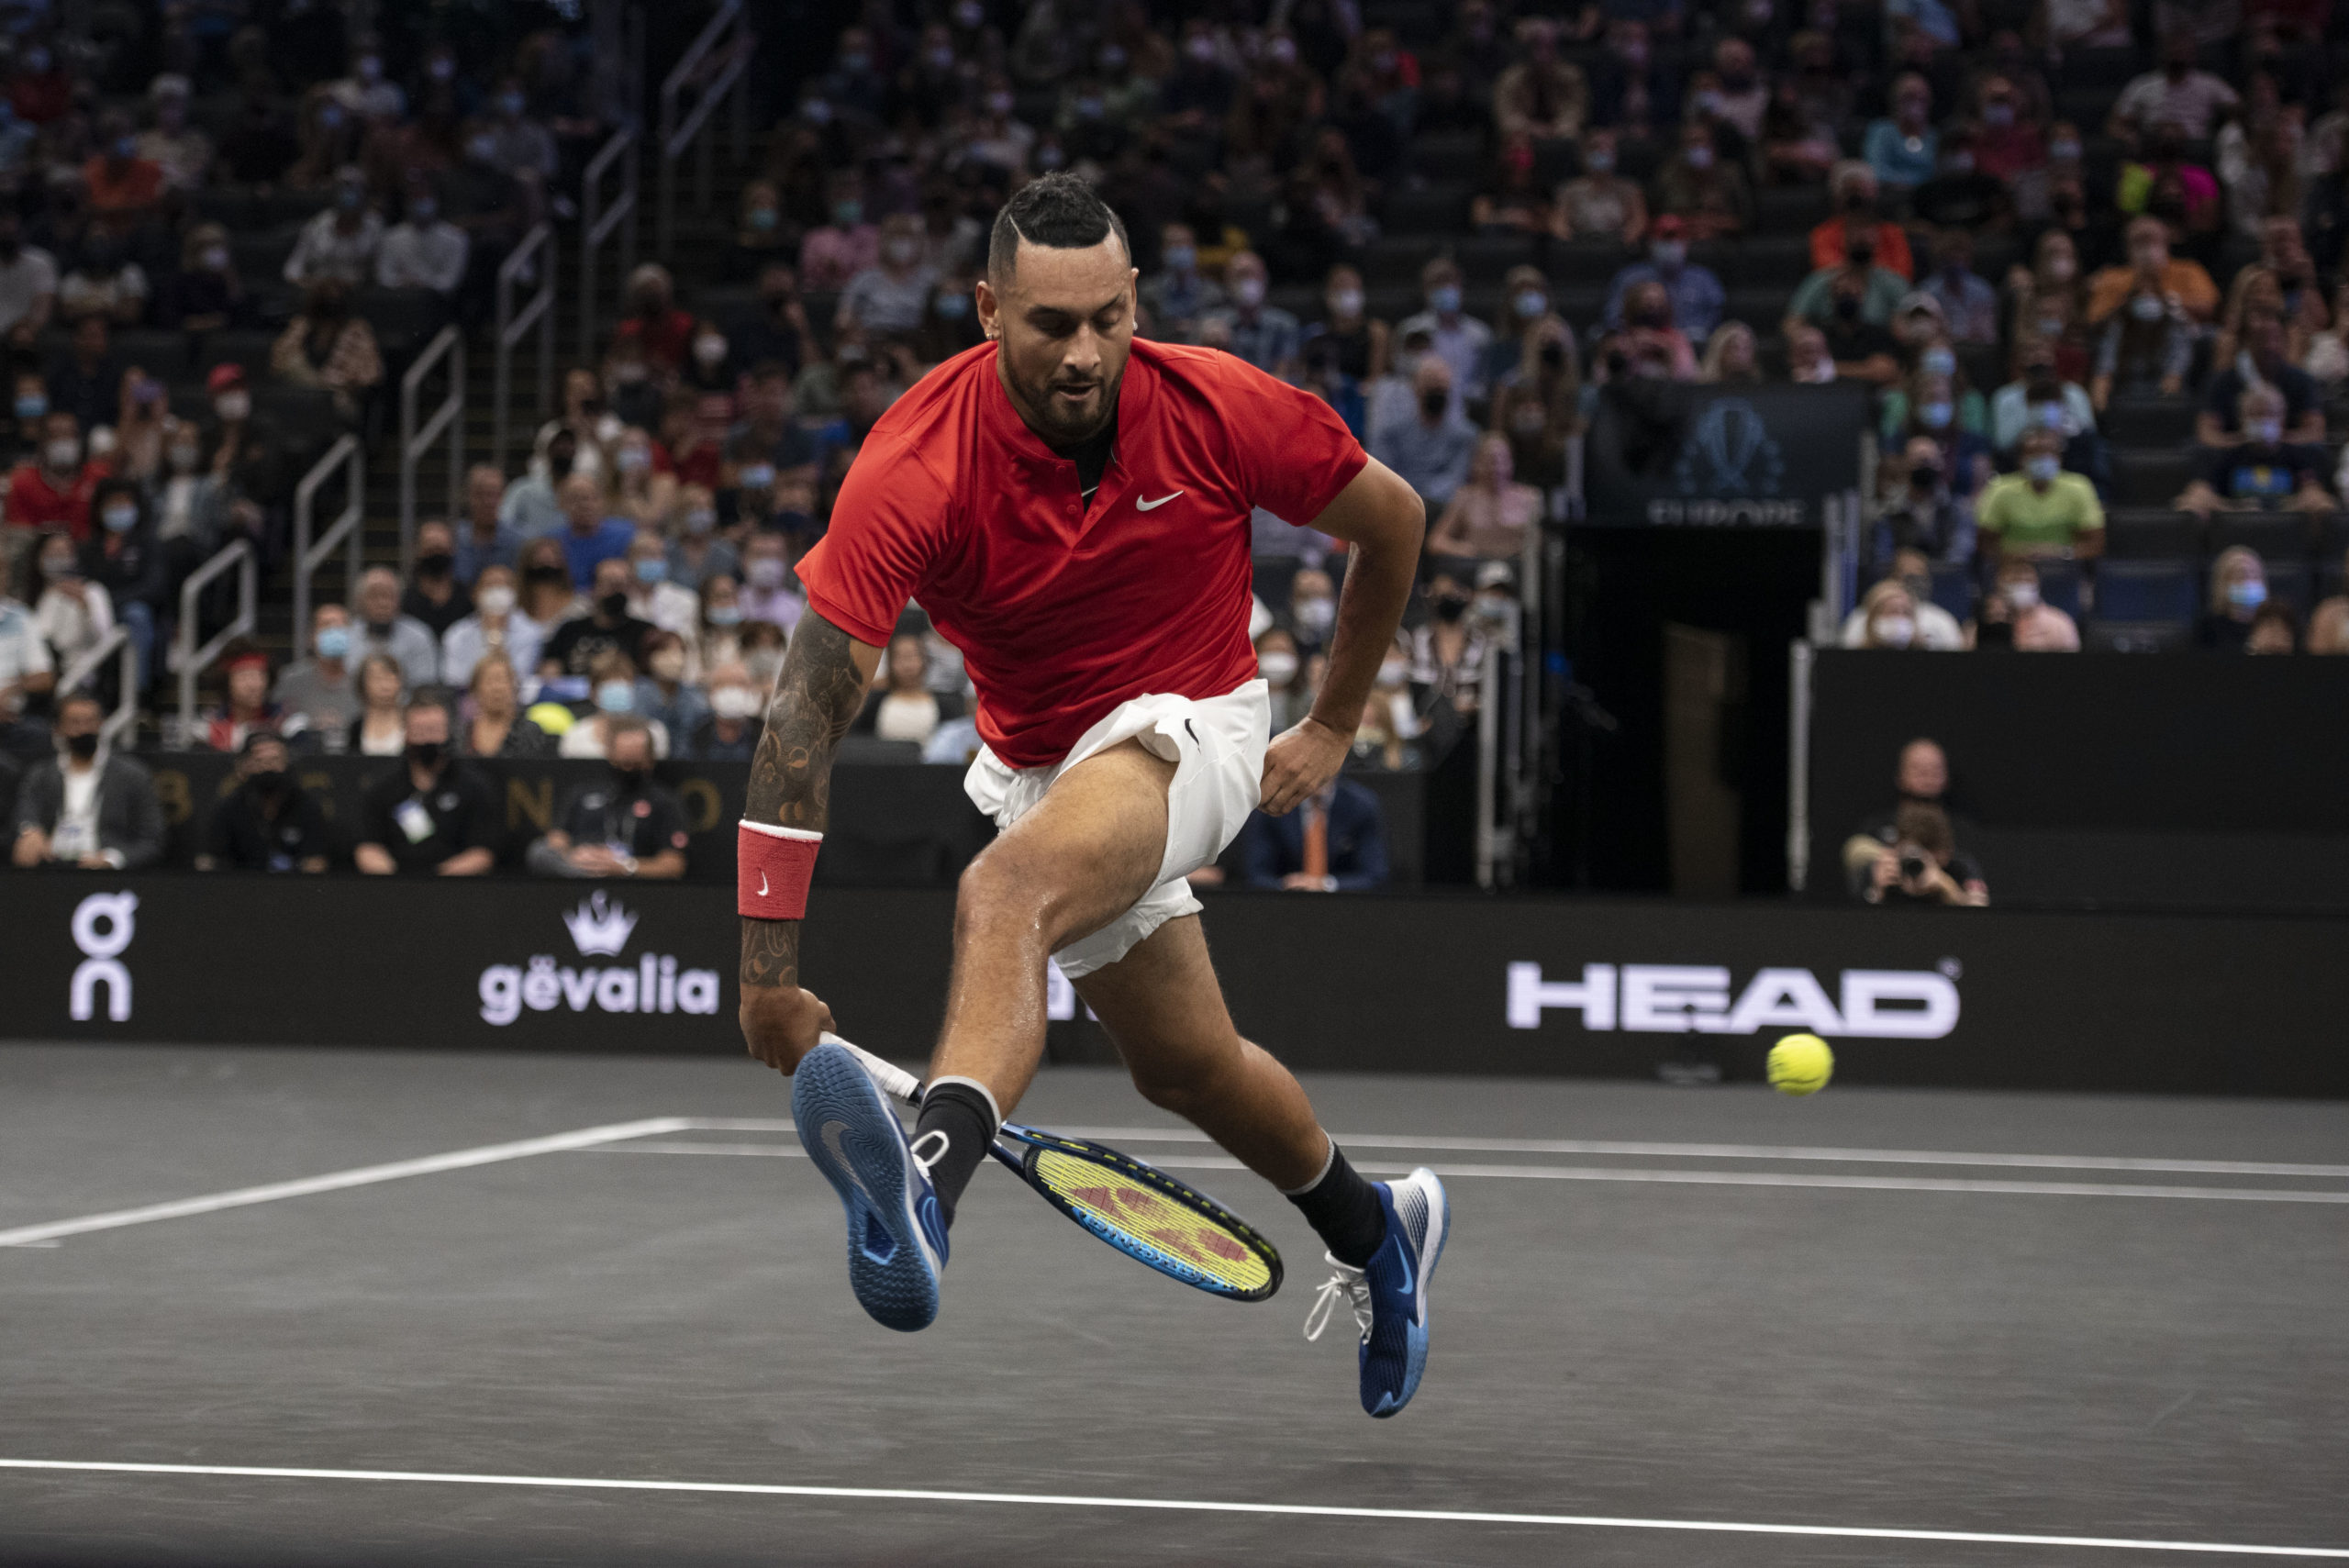 Team World player Nick Kyrgios attempts a shot between his legs during the first set of his match against Team Europe player Stefanos Tsitsipas at TD Garden. 